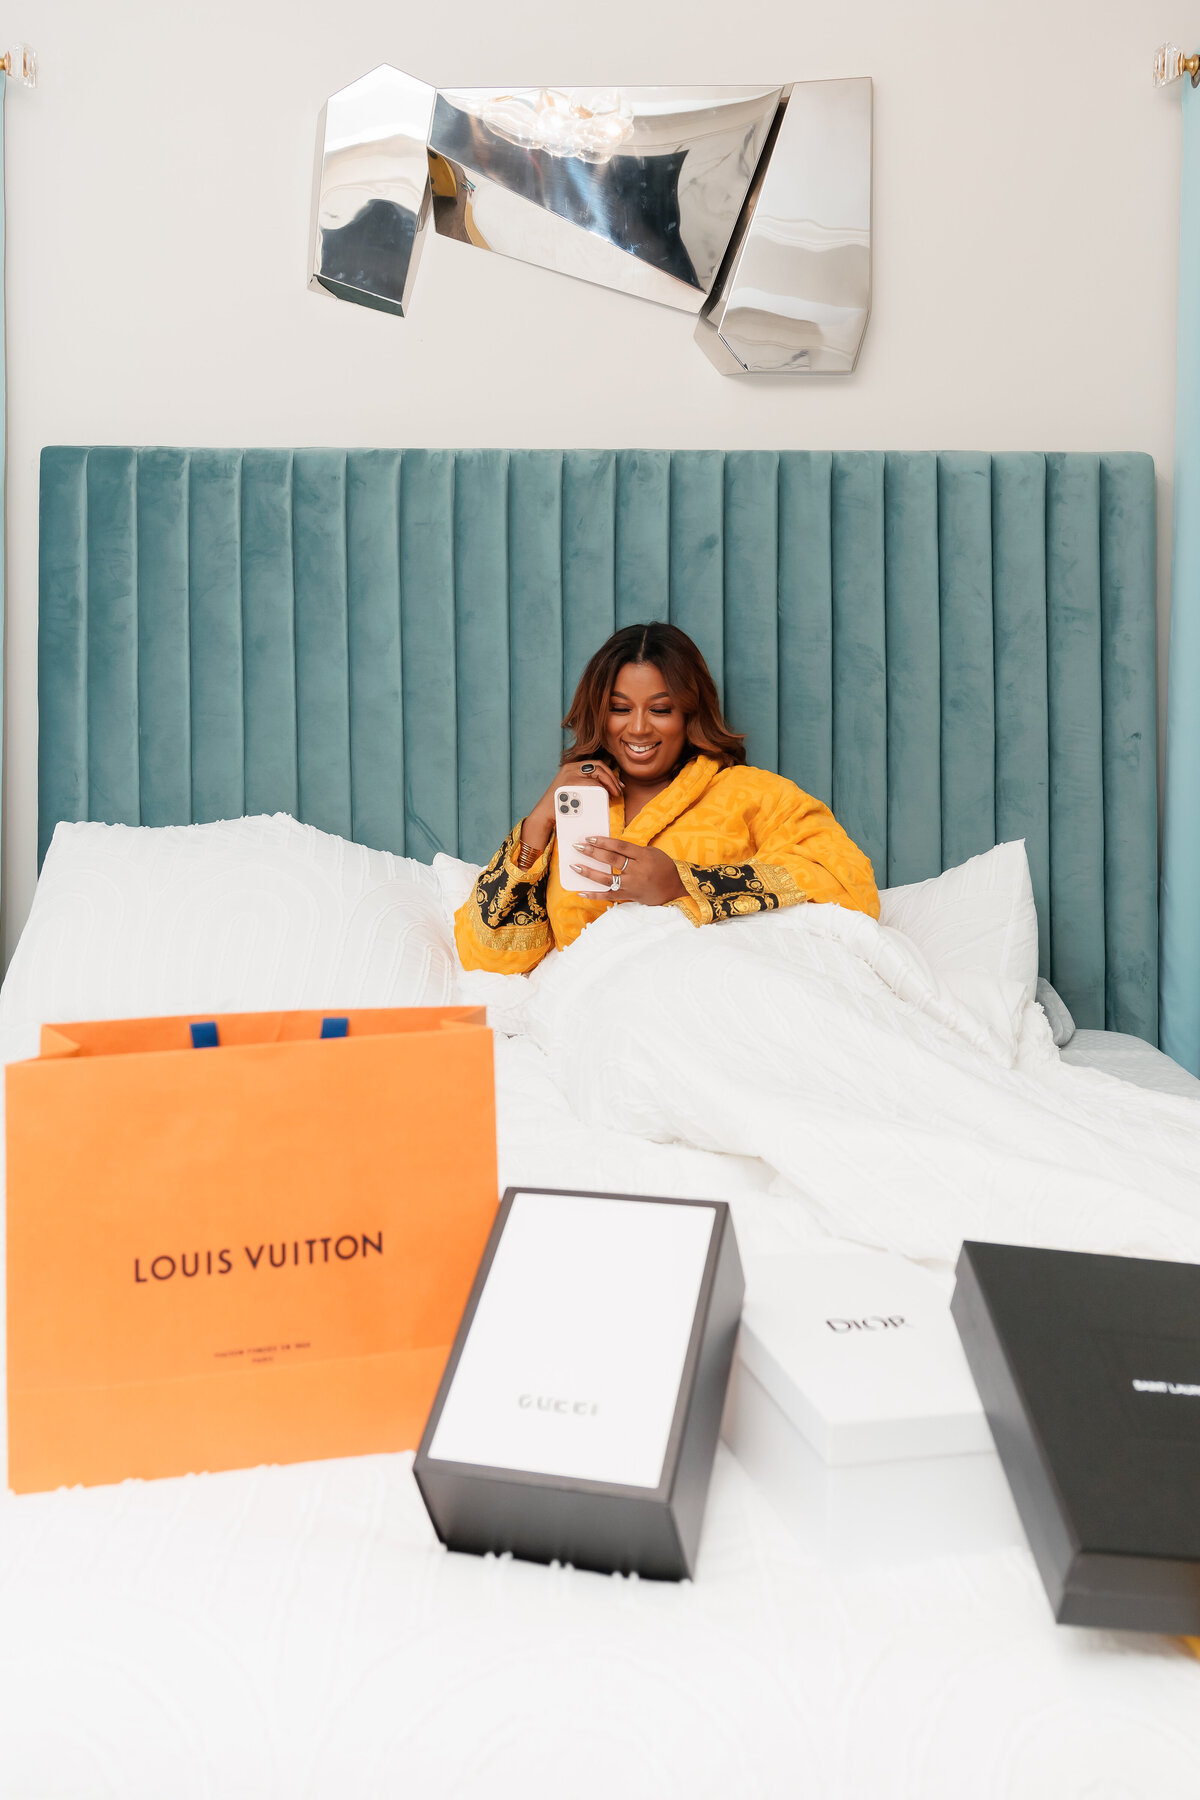 Luxury event planner poses with Louis Vuitton, Gucci bags in bed.